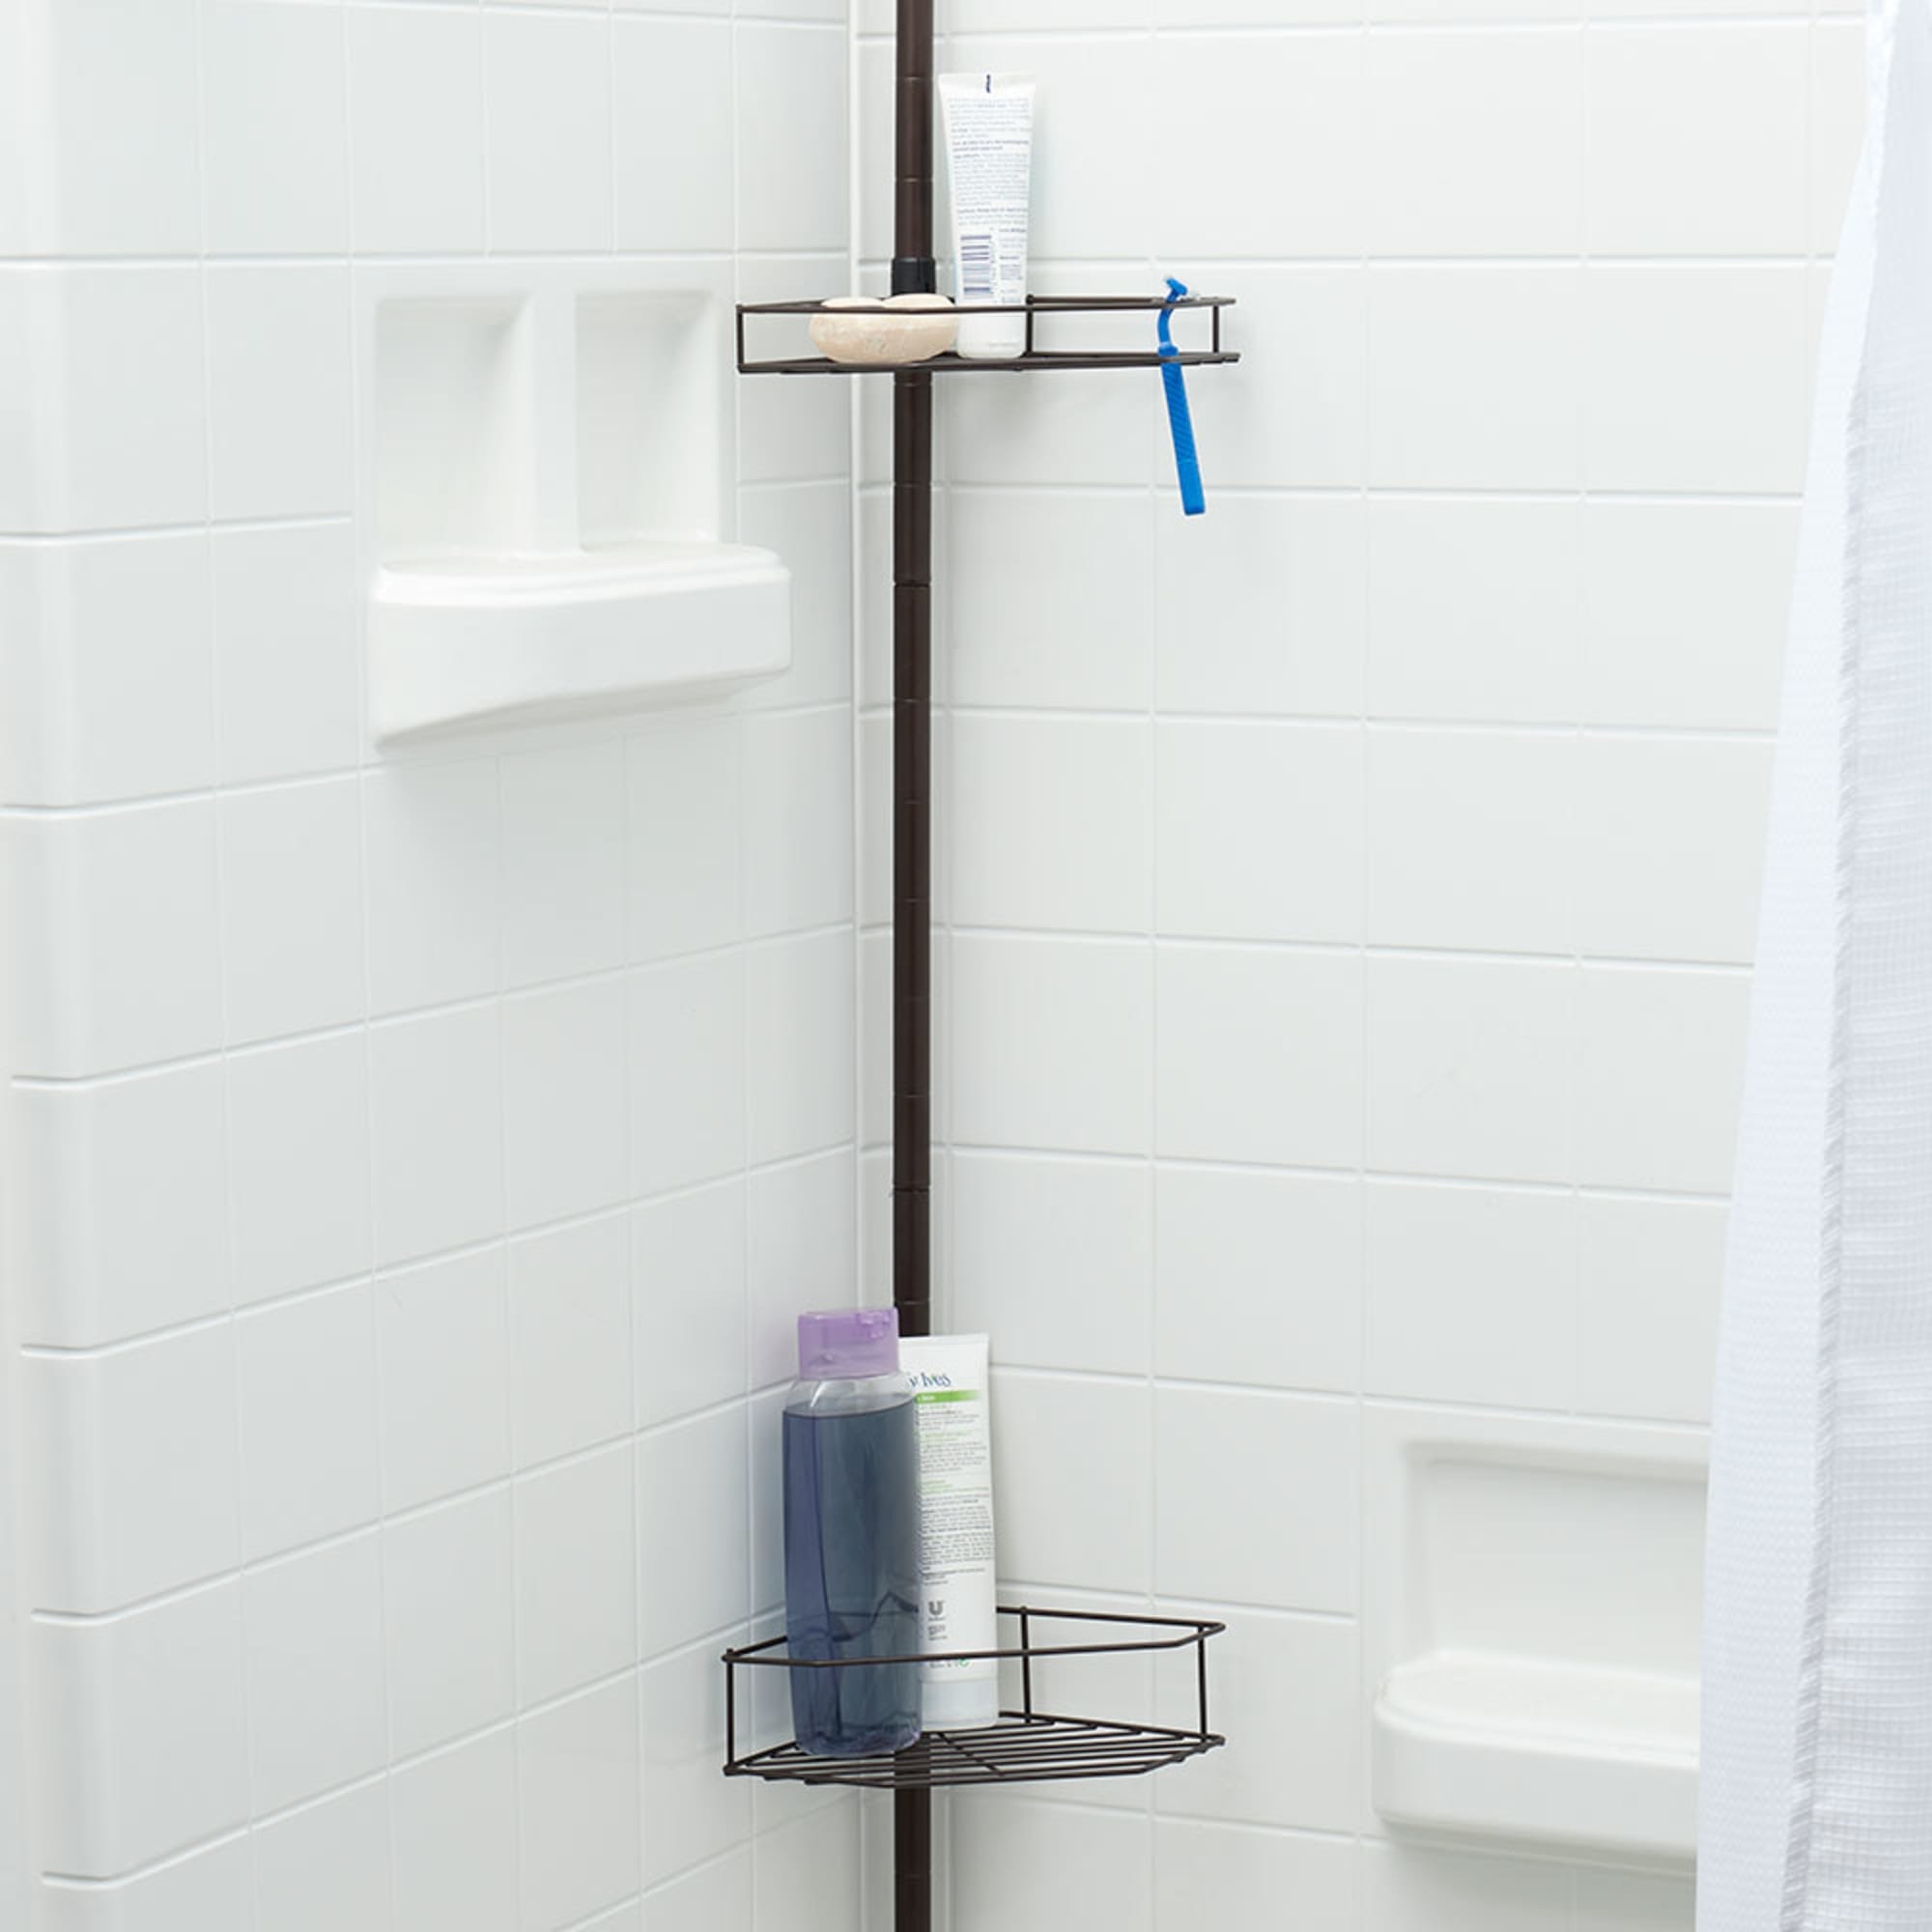 Home Basics 3 Tier Tension  Rod  Shower Caddy, Bronze $15.00 EACH, CASE PACK OF 6